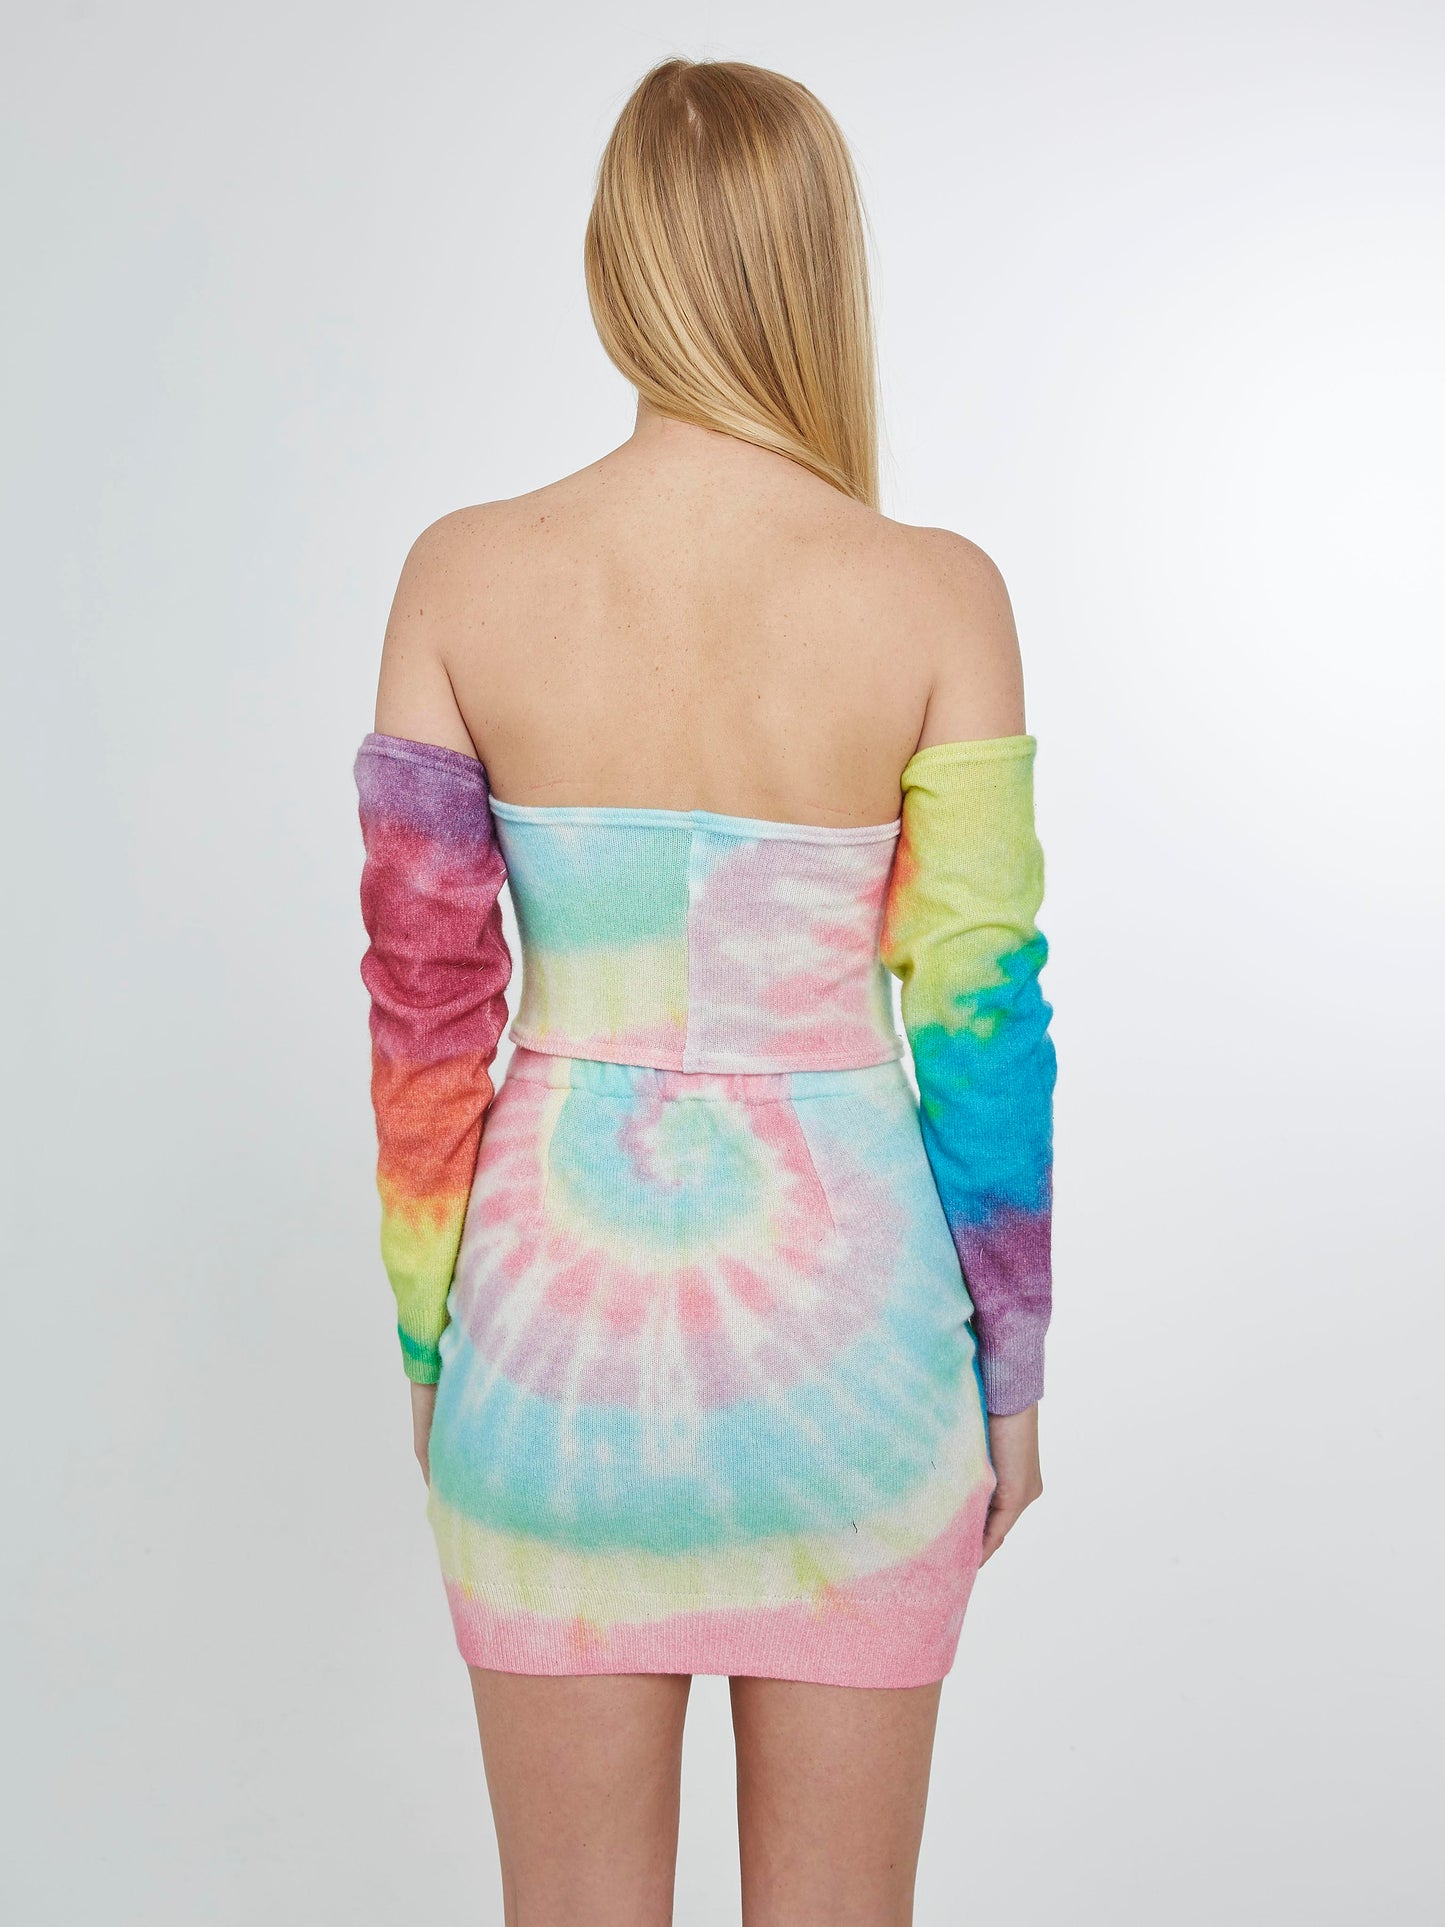 Pastel tie dye skirt with front knot